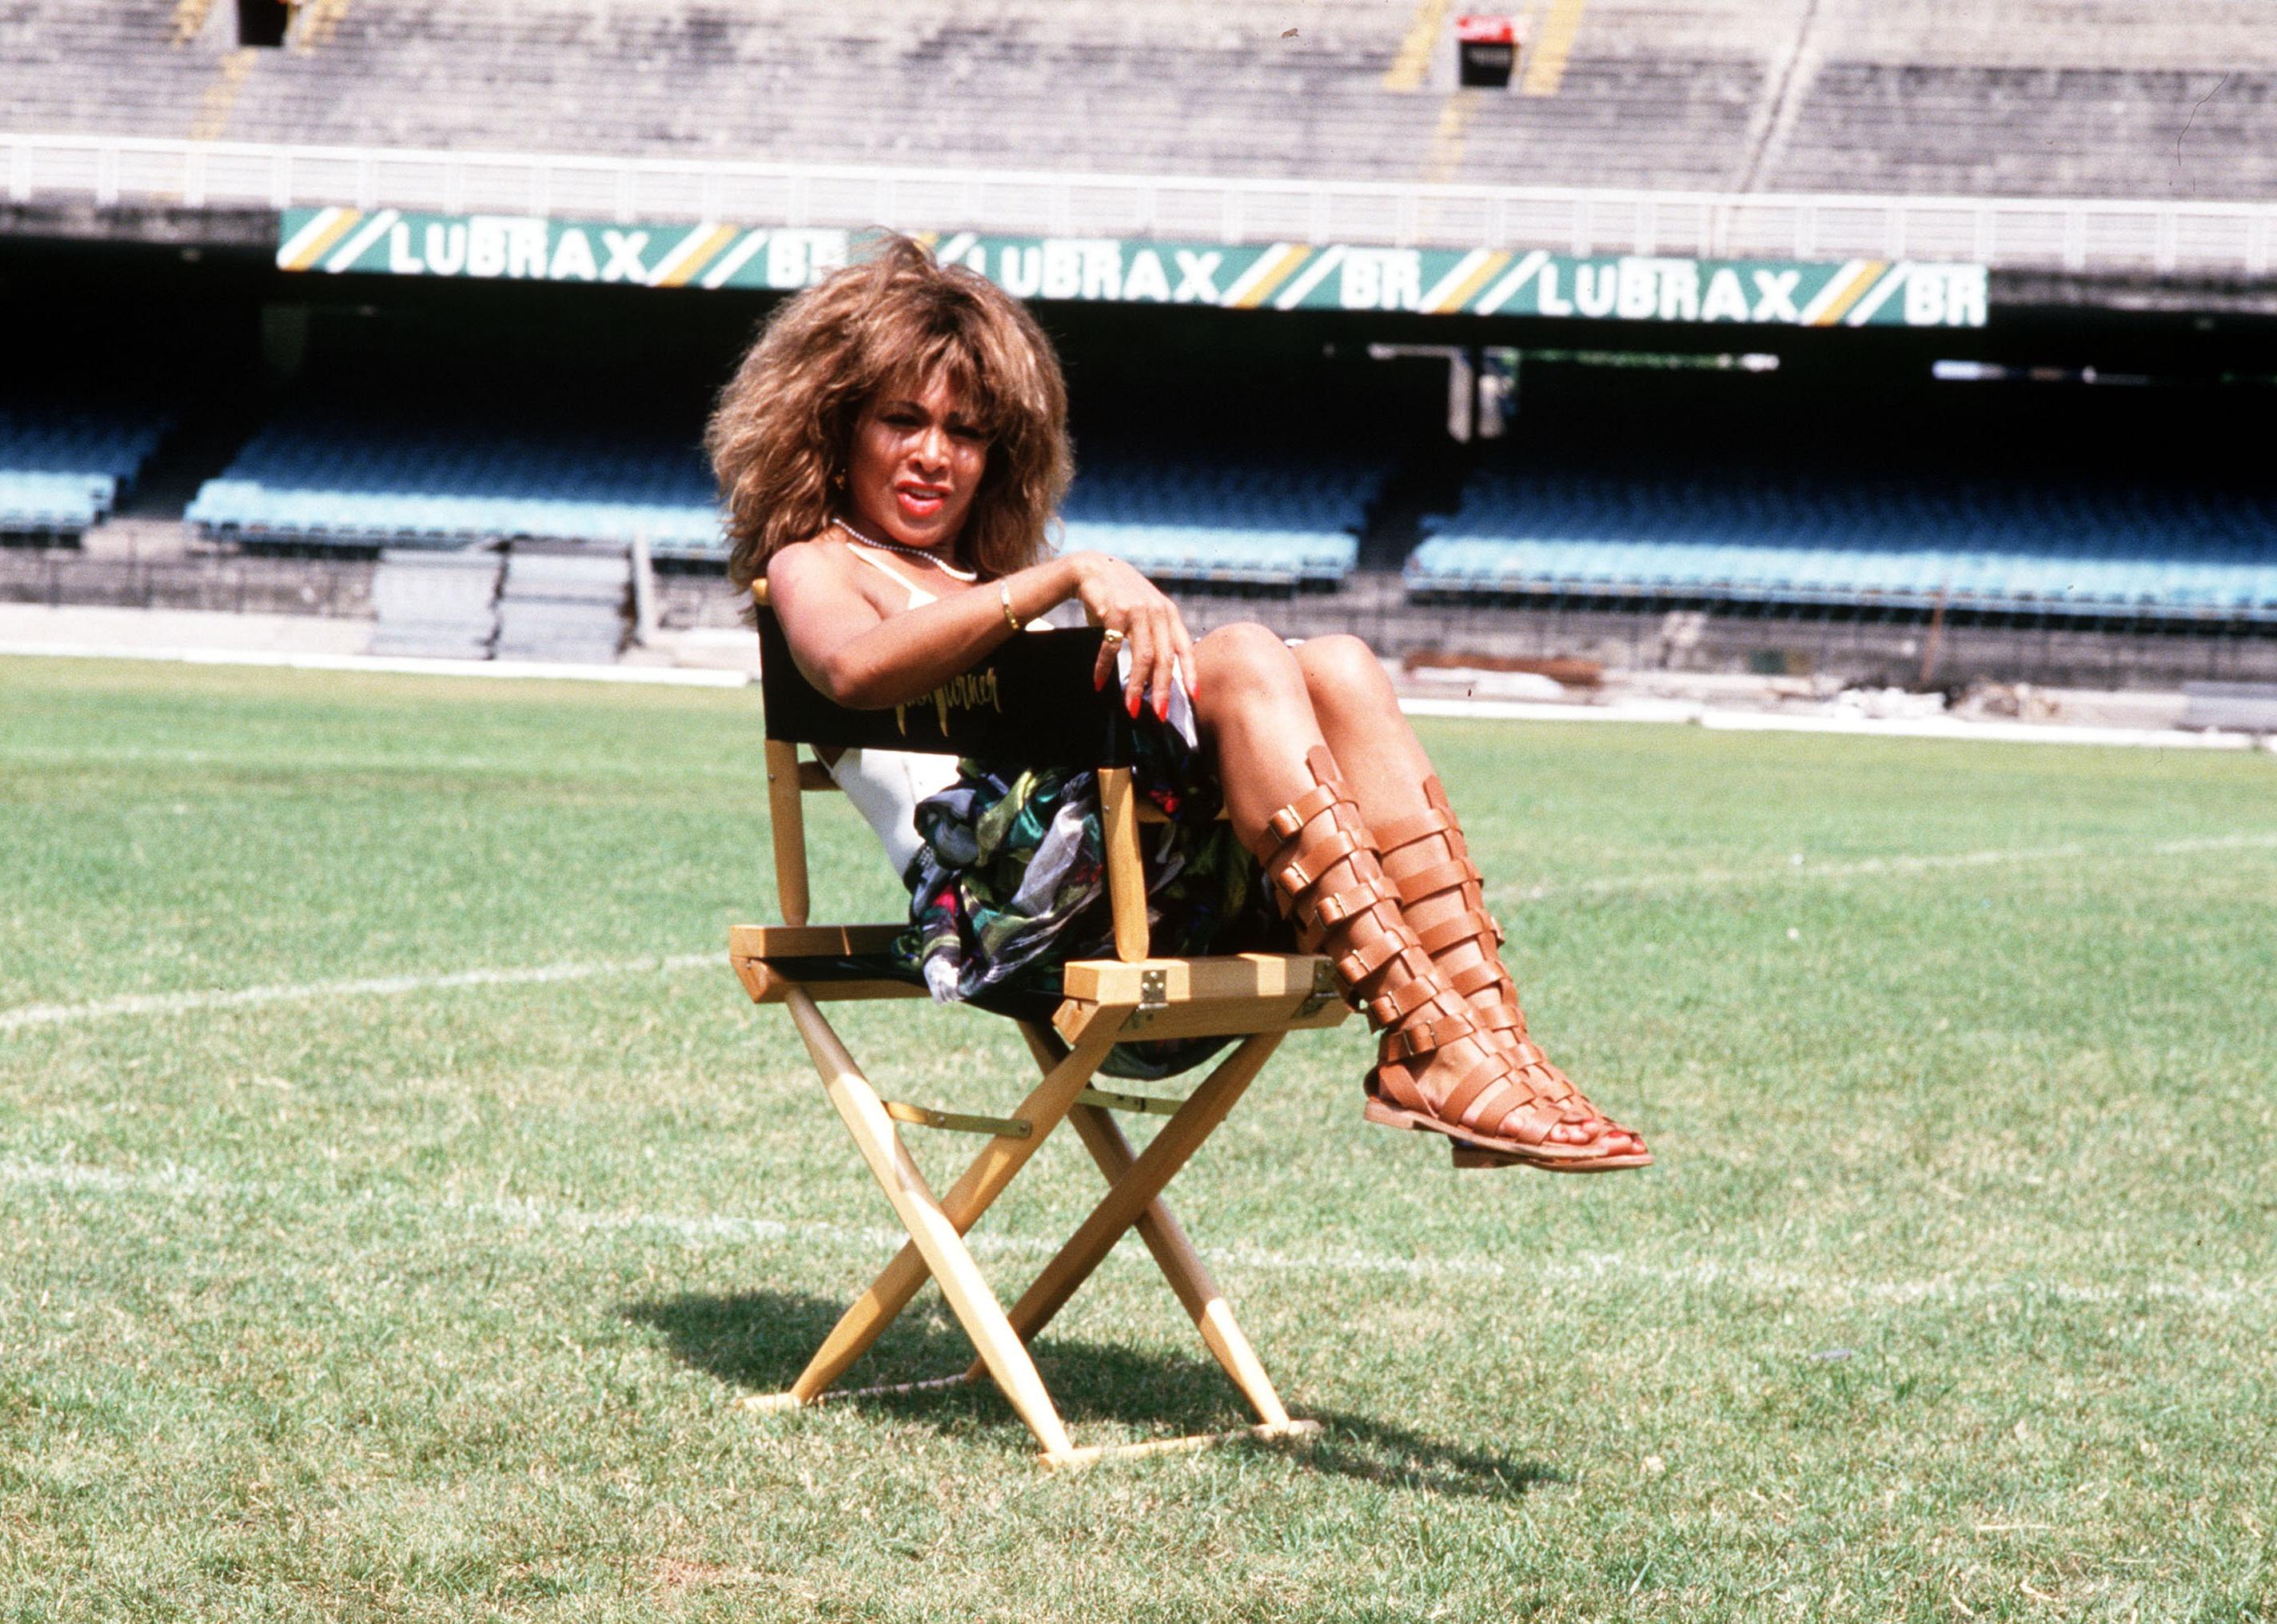 Tina Turner sitting in a chair on the field of a stadium in Rio de Janeiro, Brazil.